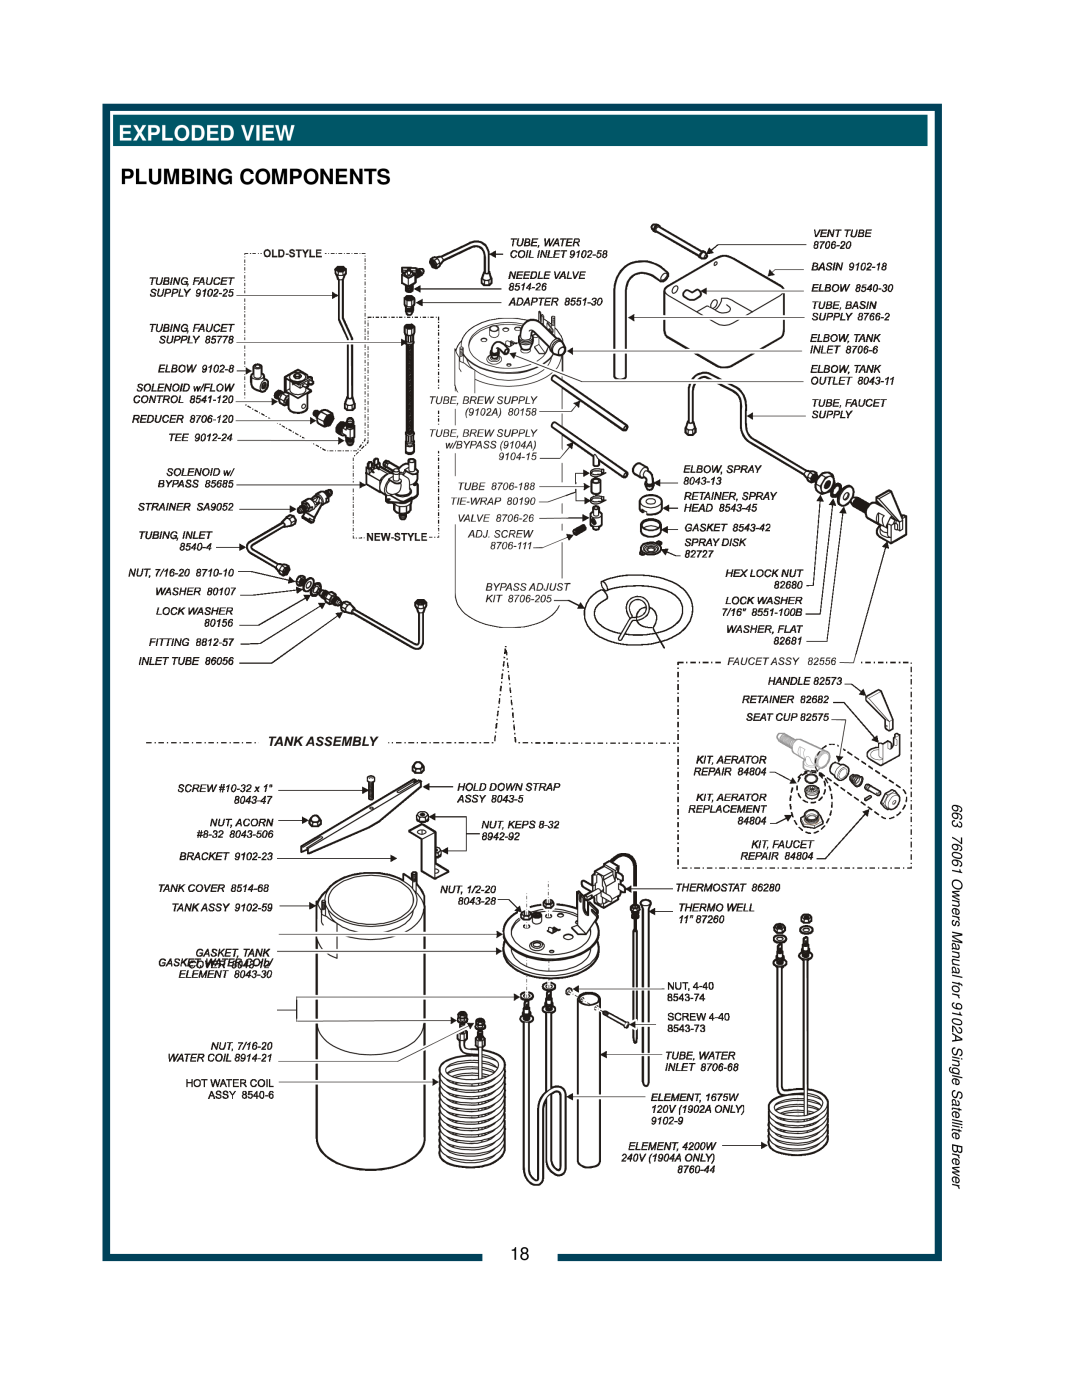 Bloomfield 9104A owner manual Exploded View, Plumbing Components, Owners Manual for 9102A Single Satellite Brewer 